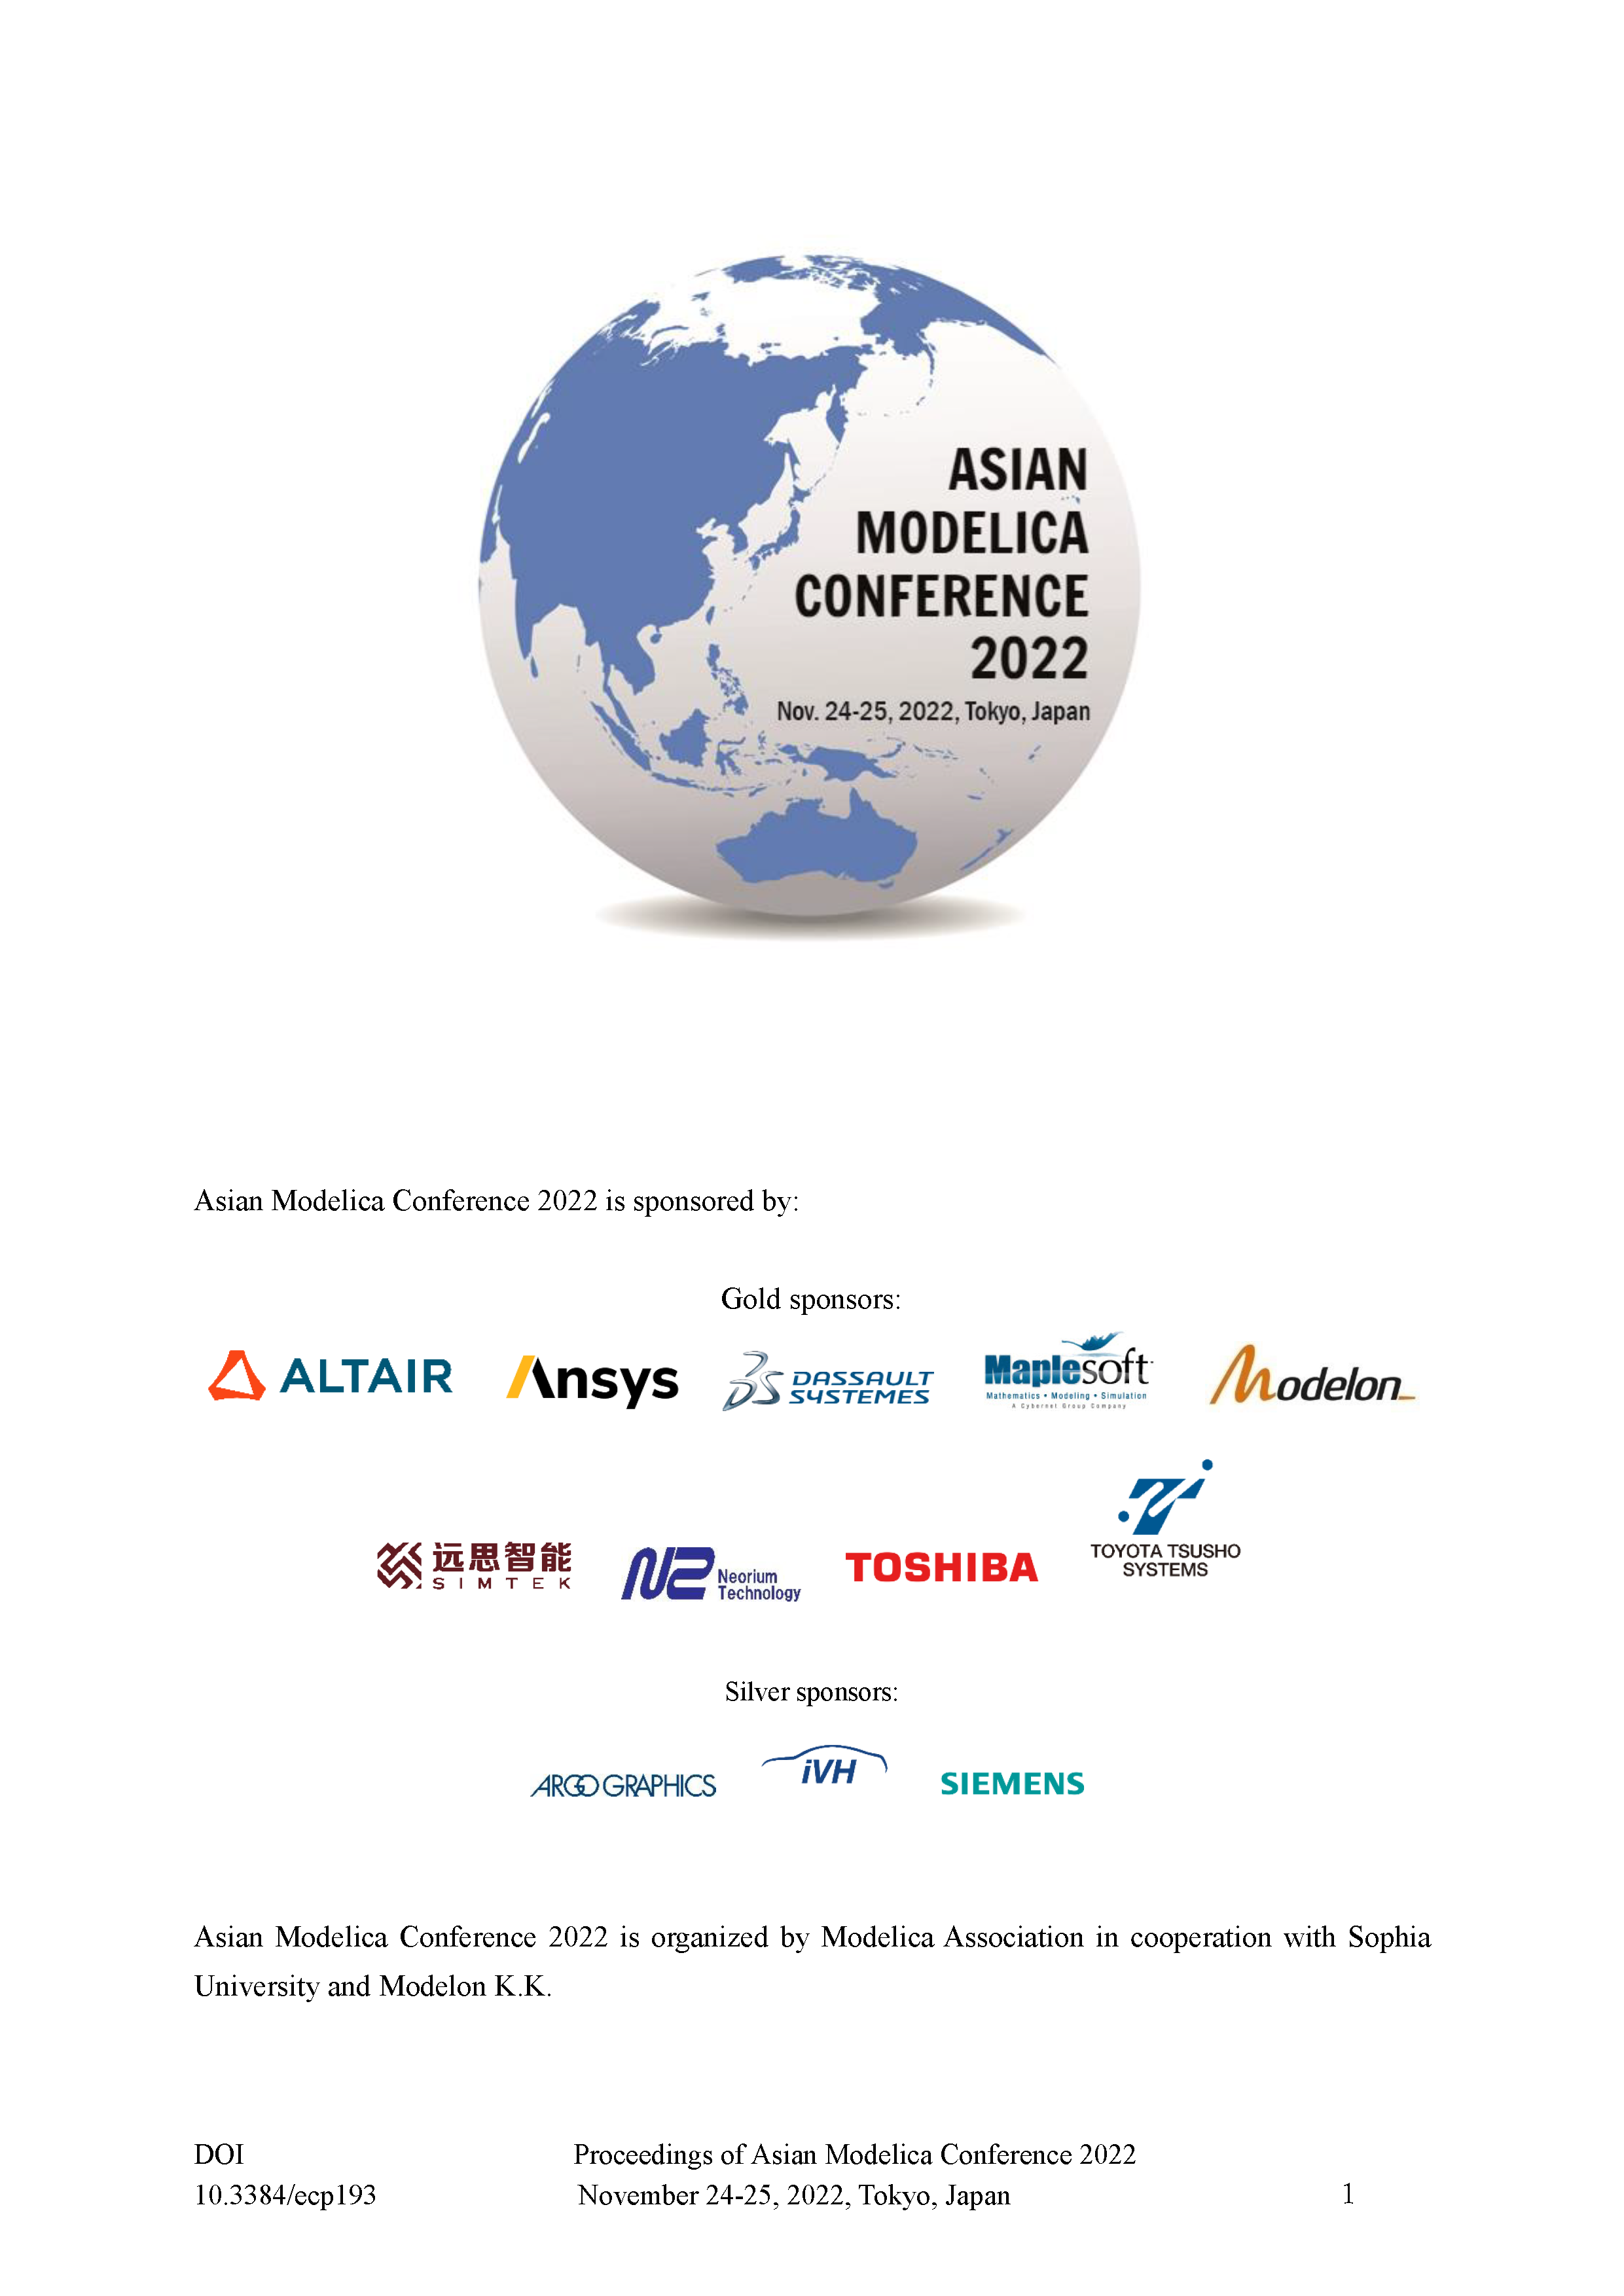 					View Proceedings of Asian Modelica Conference 2022, Tokyo, Japan, November 24-25, 2022
				